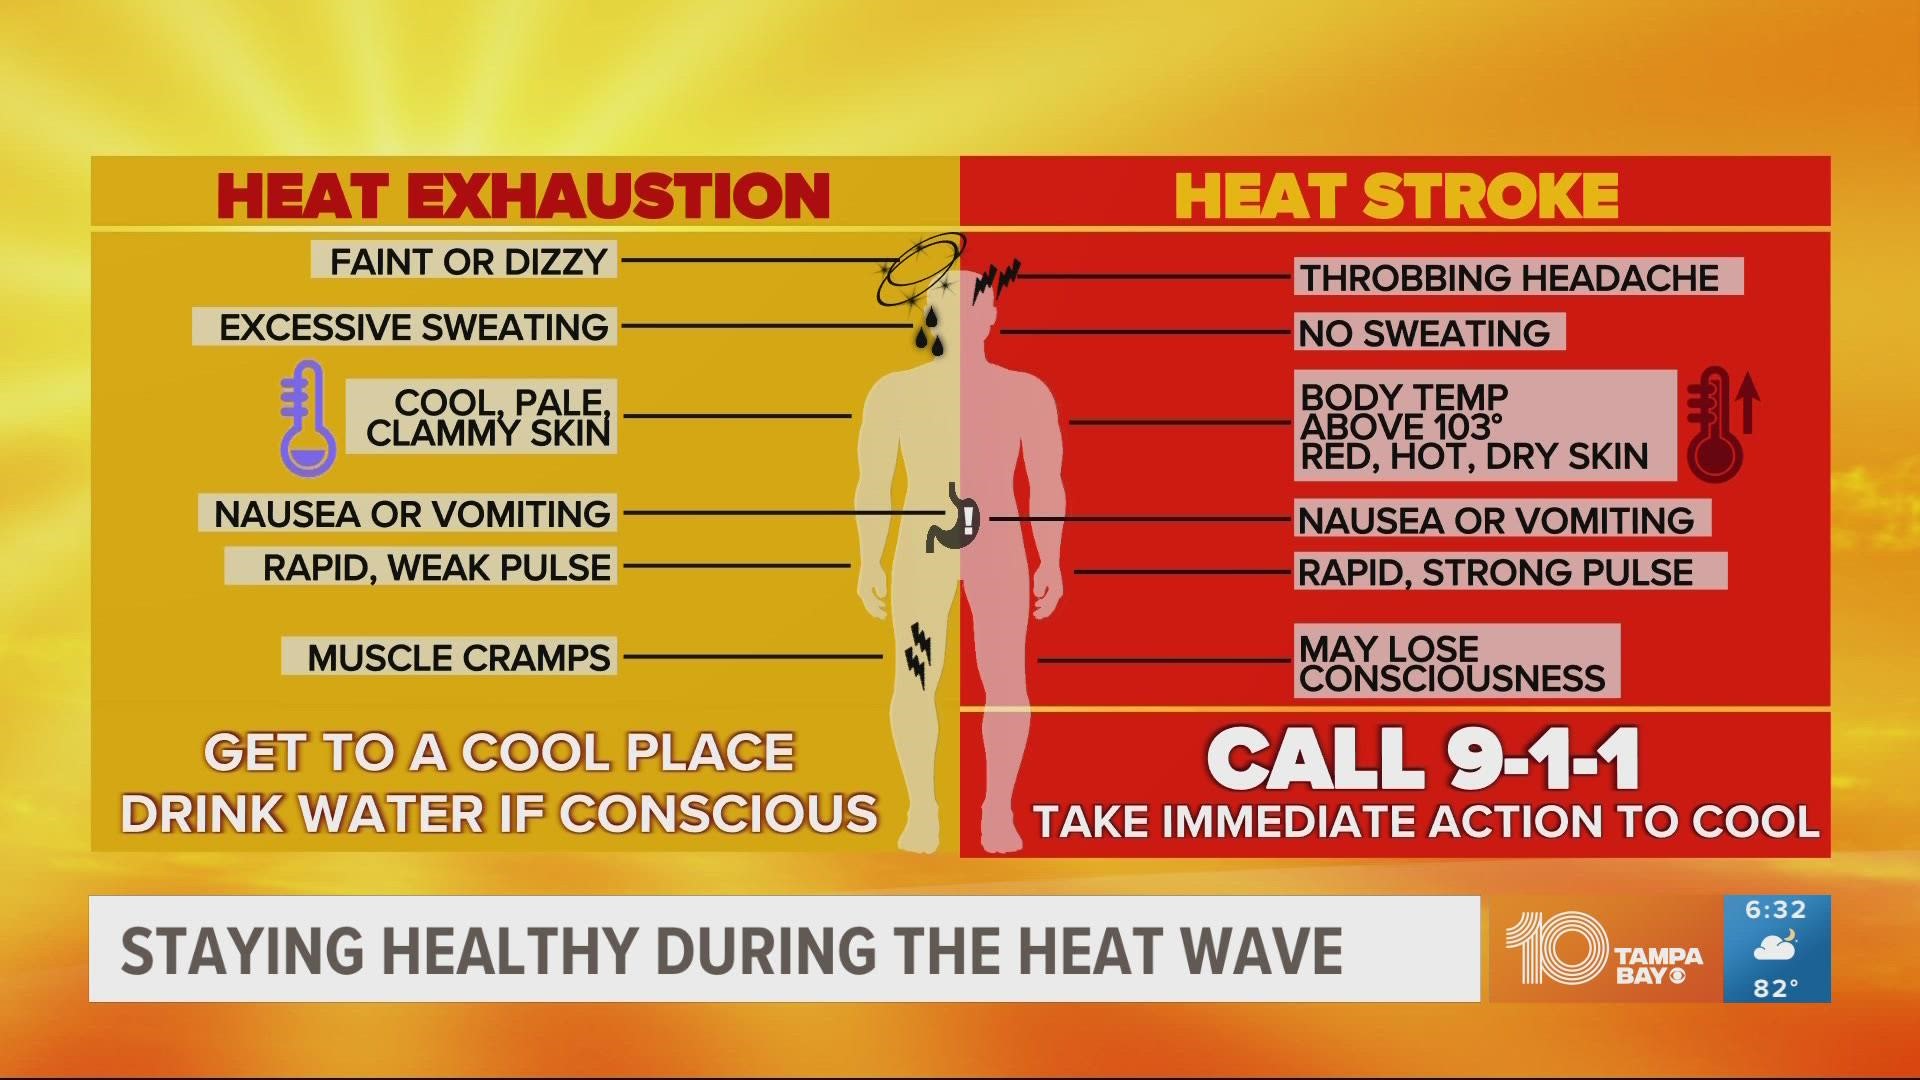 It's important to know the symptoms and how to prevent getting overheated.